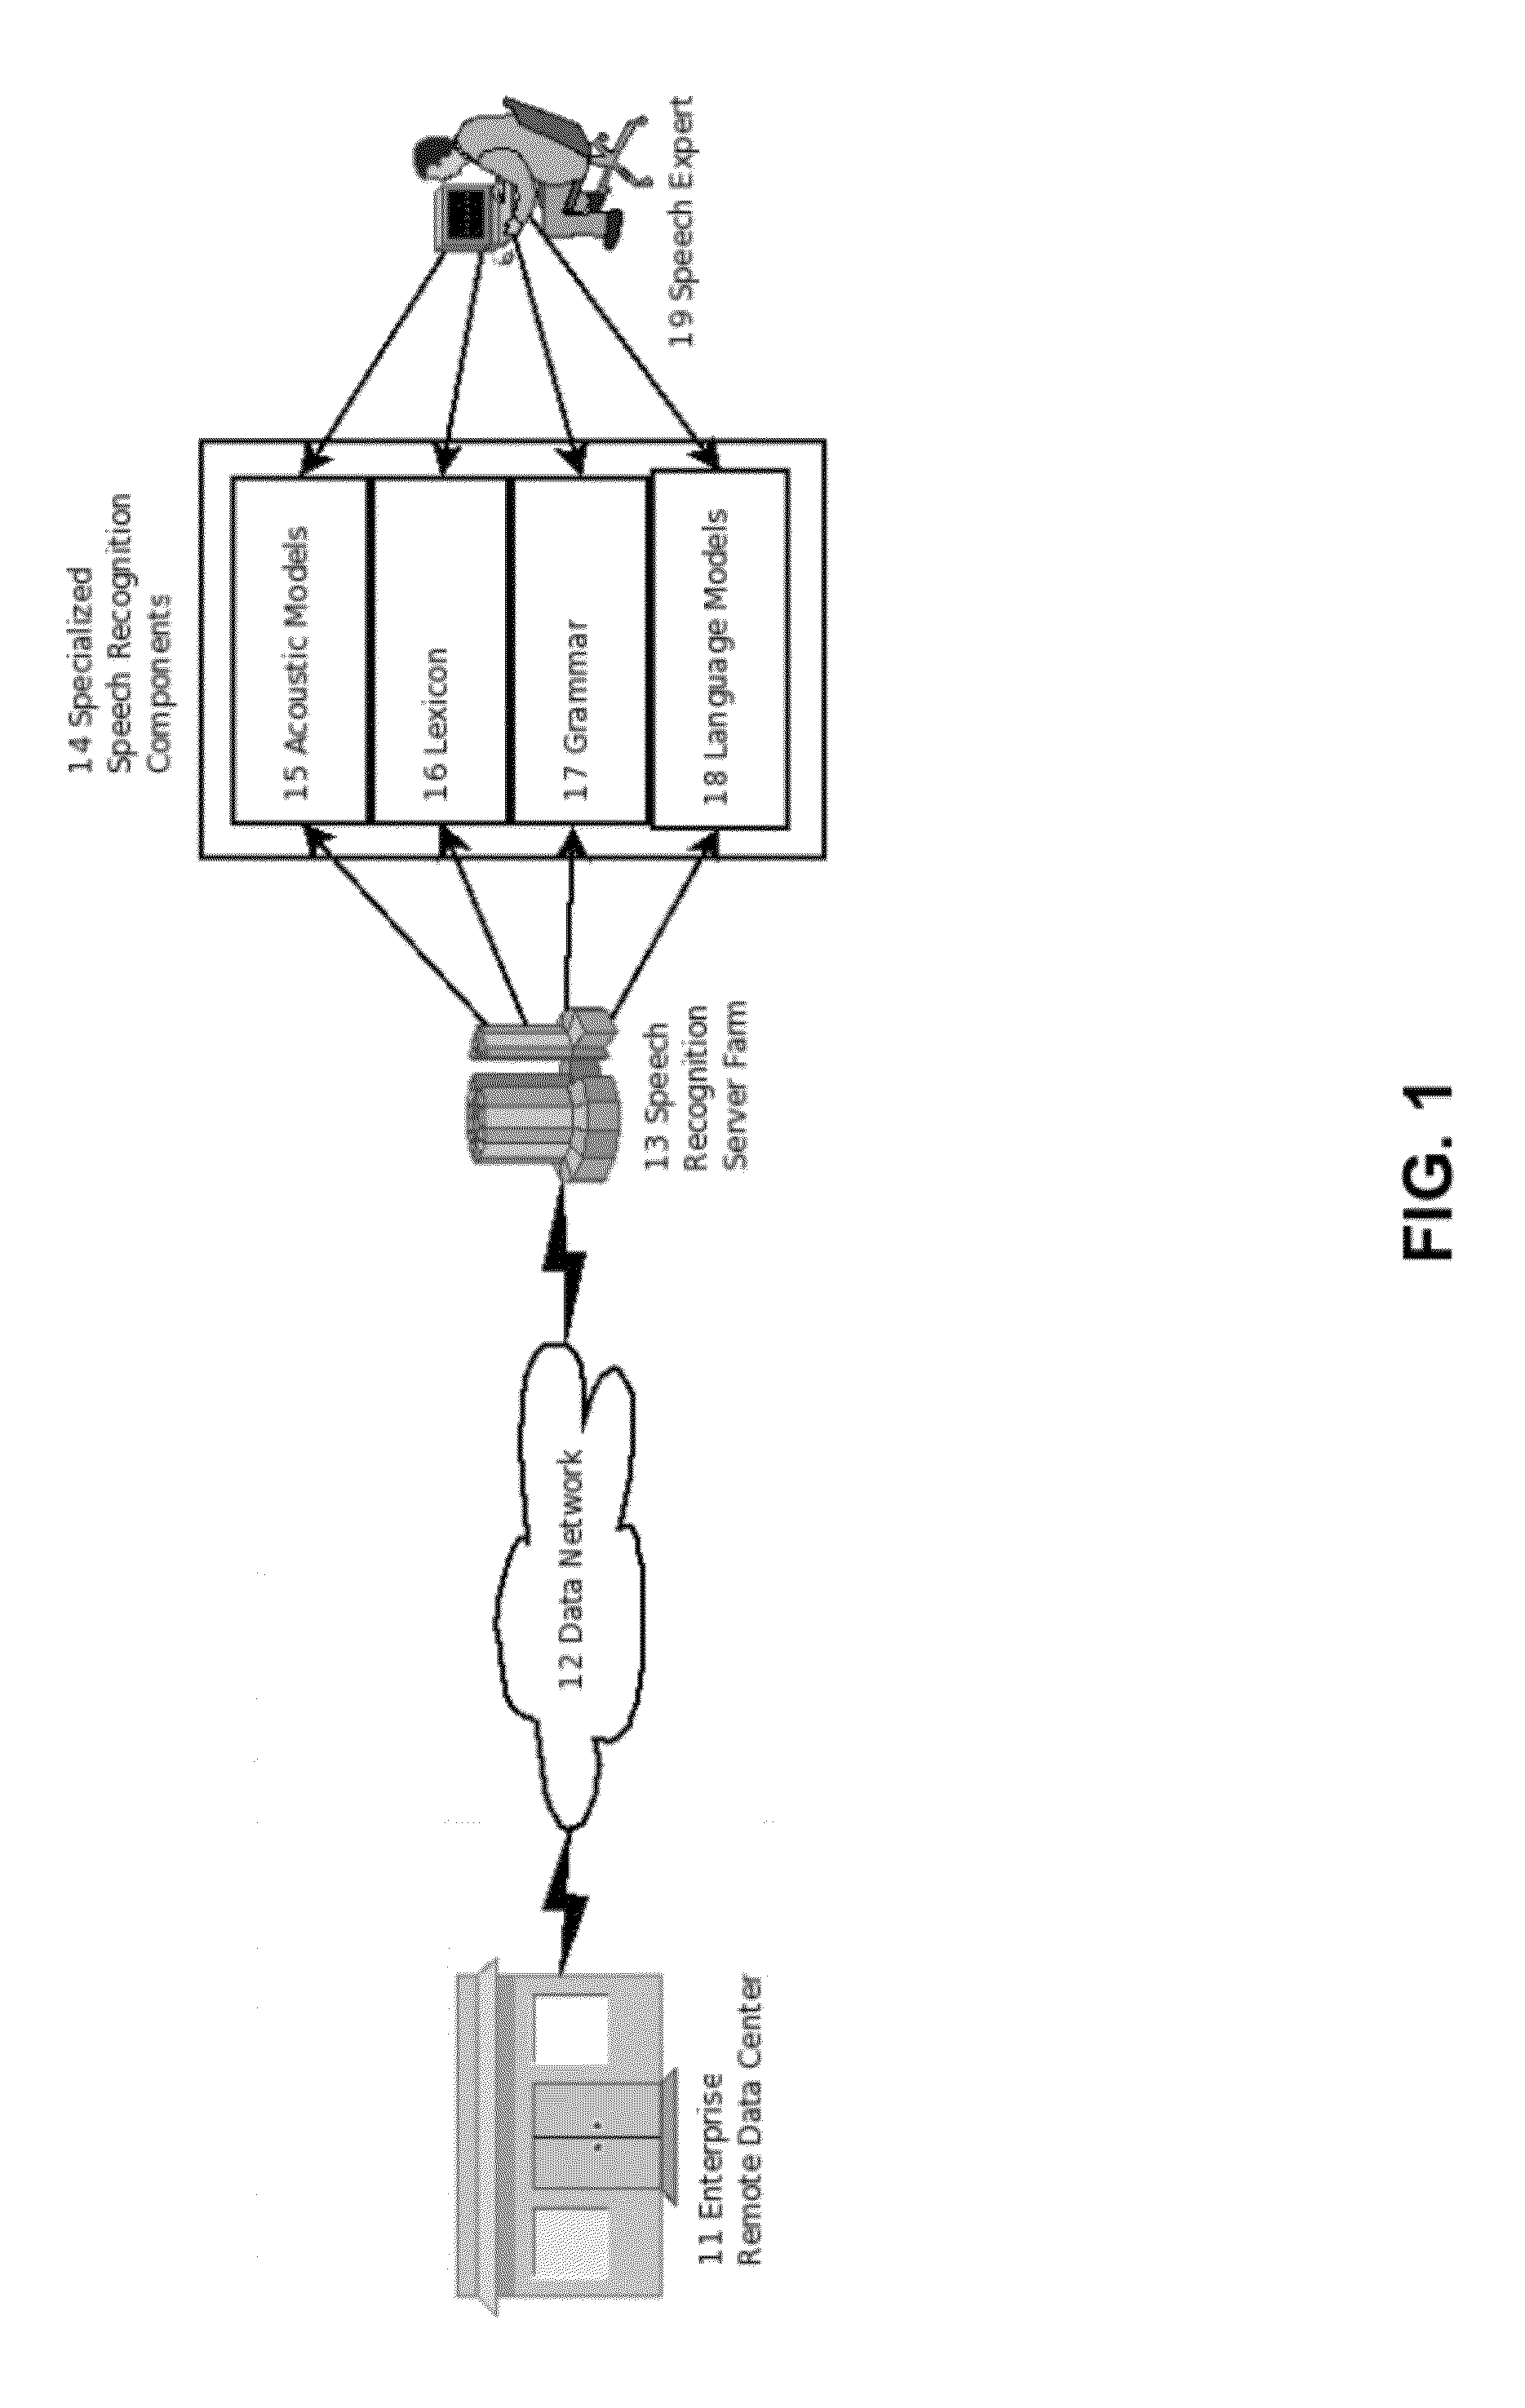 Hybrid Dialog Speech Recognition for In-Vehicle Automated Interaction and In-Vehicle Interfaces Requiring Minimal Driver Processing